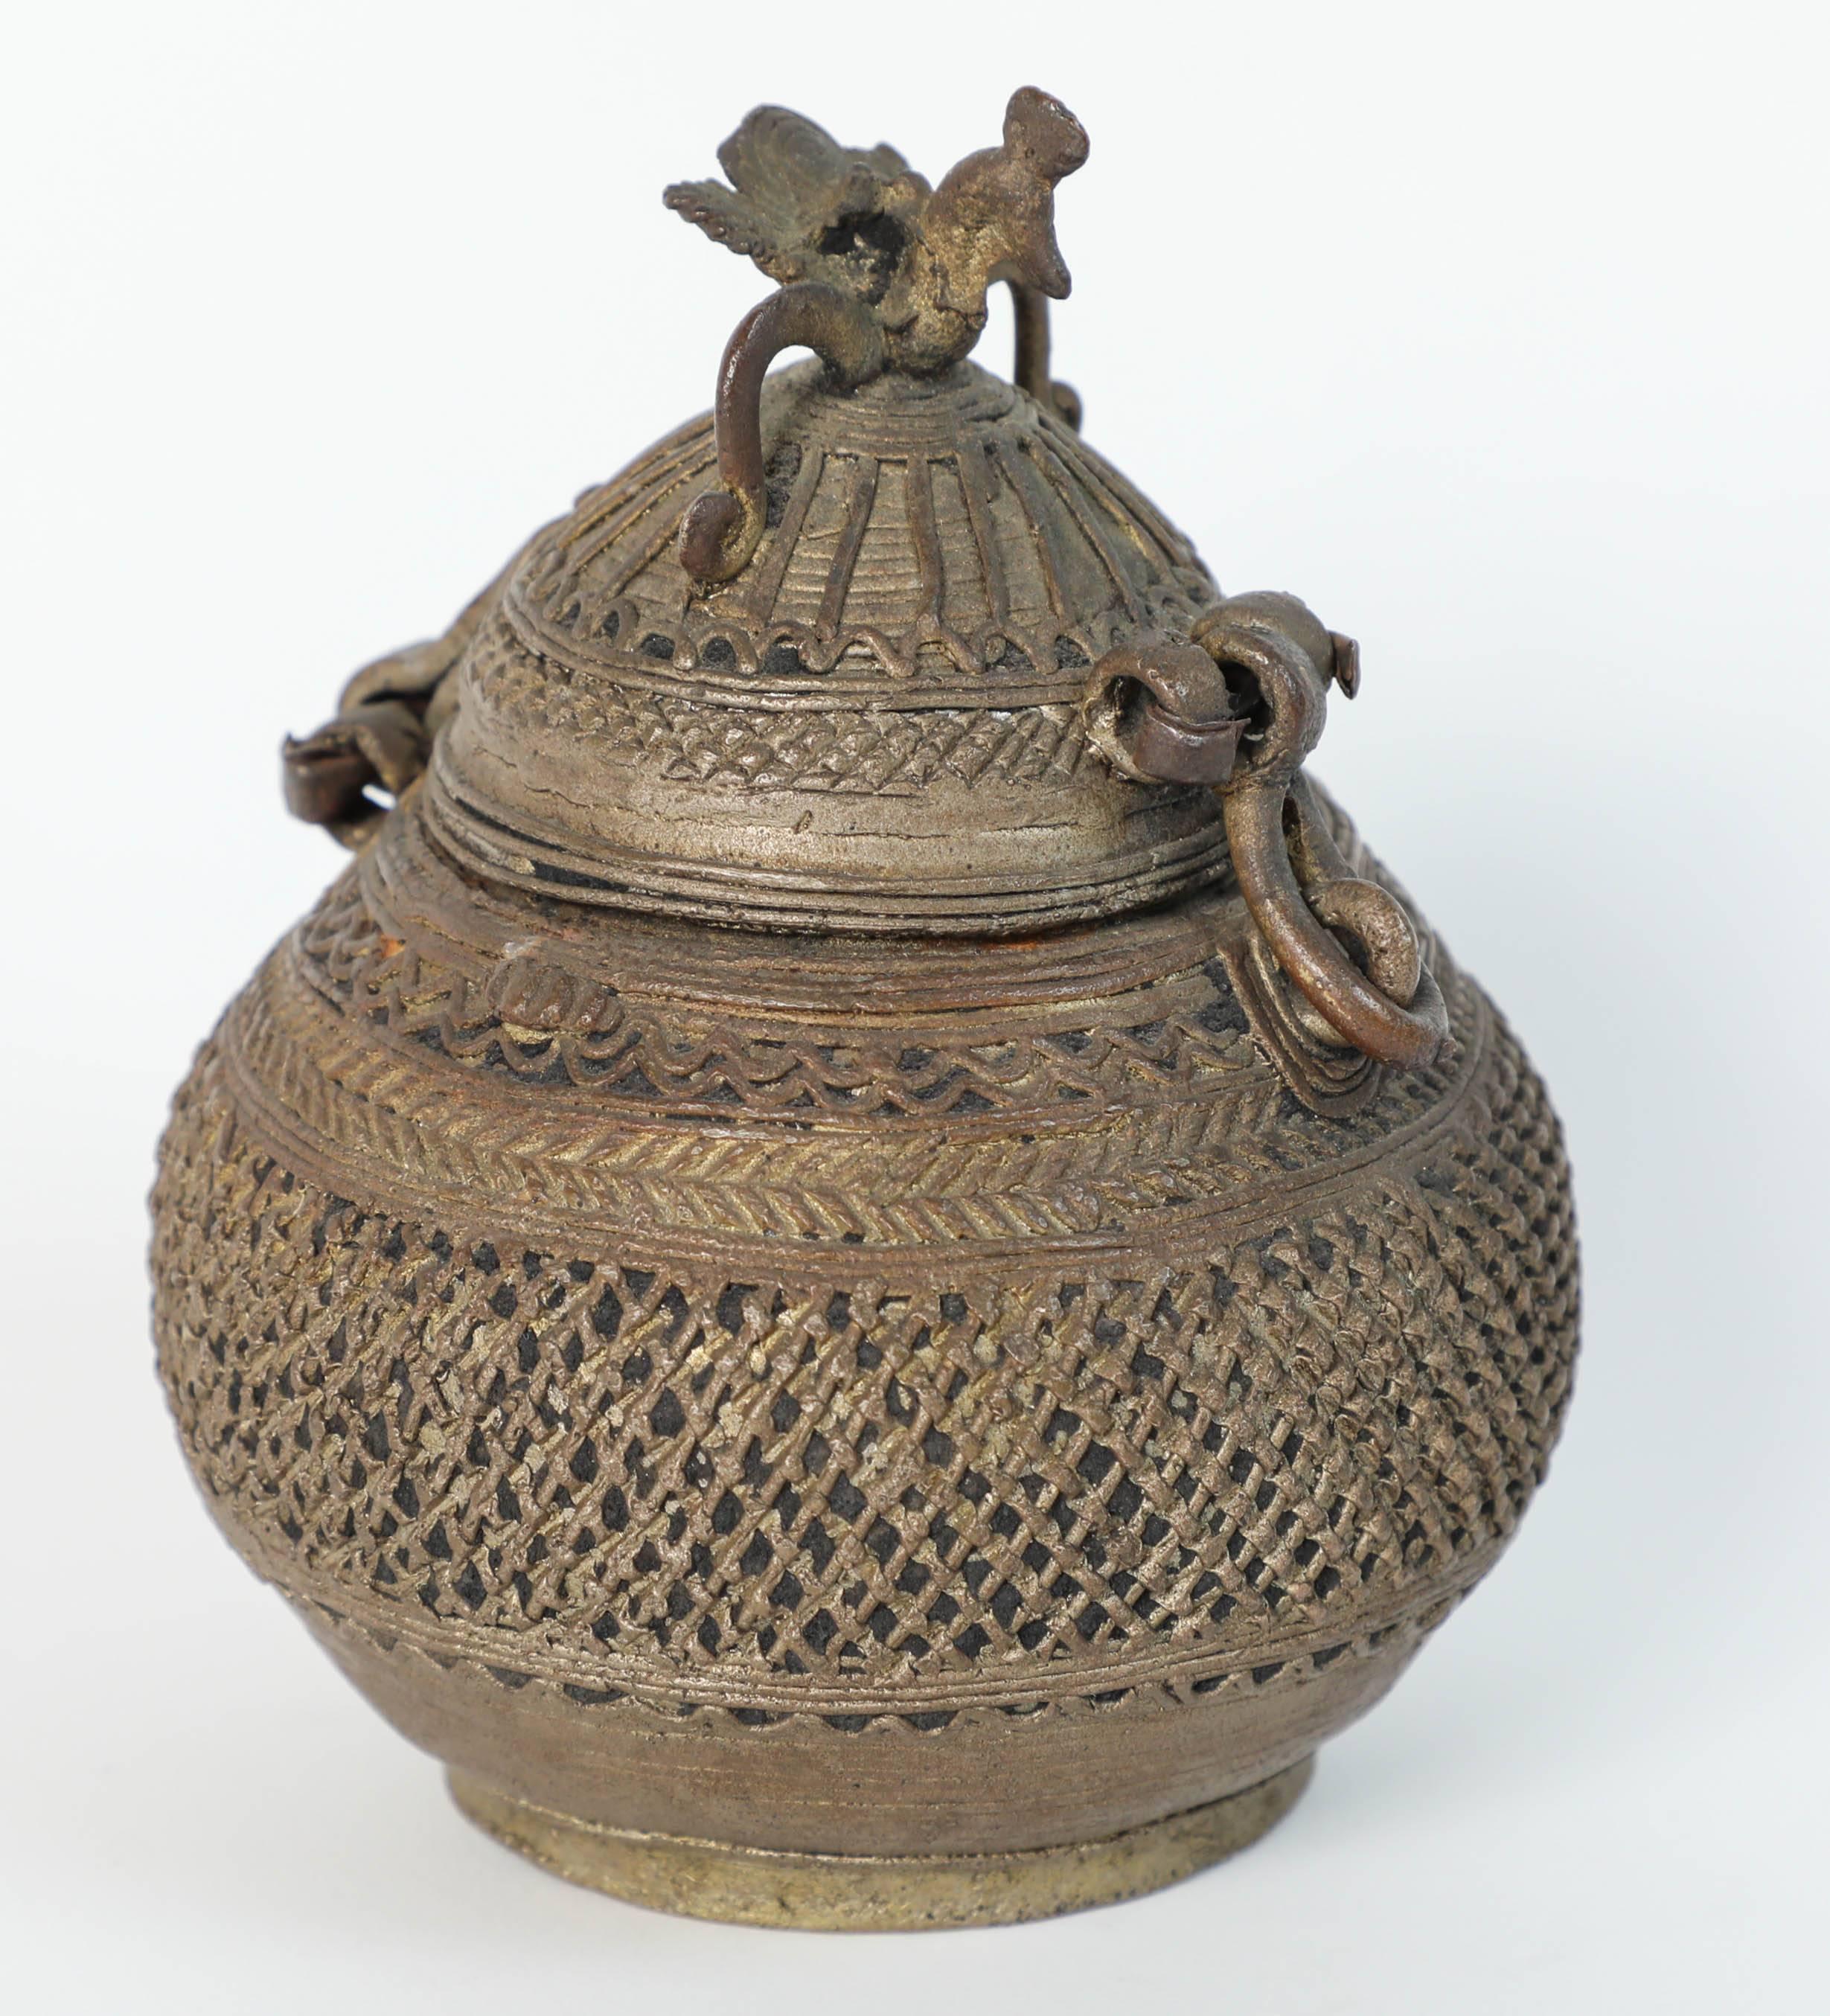 An extraordinary tribal India bronze censor box.
Constructed as a cage made from many rolled wax wires in an organic swollen mango form, with a hinged lid surmounted by a stylized peacock exotic bird finial.
Tribal India bronze censor box. Kondh